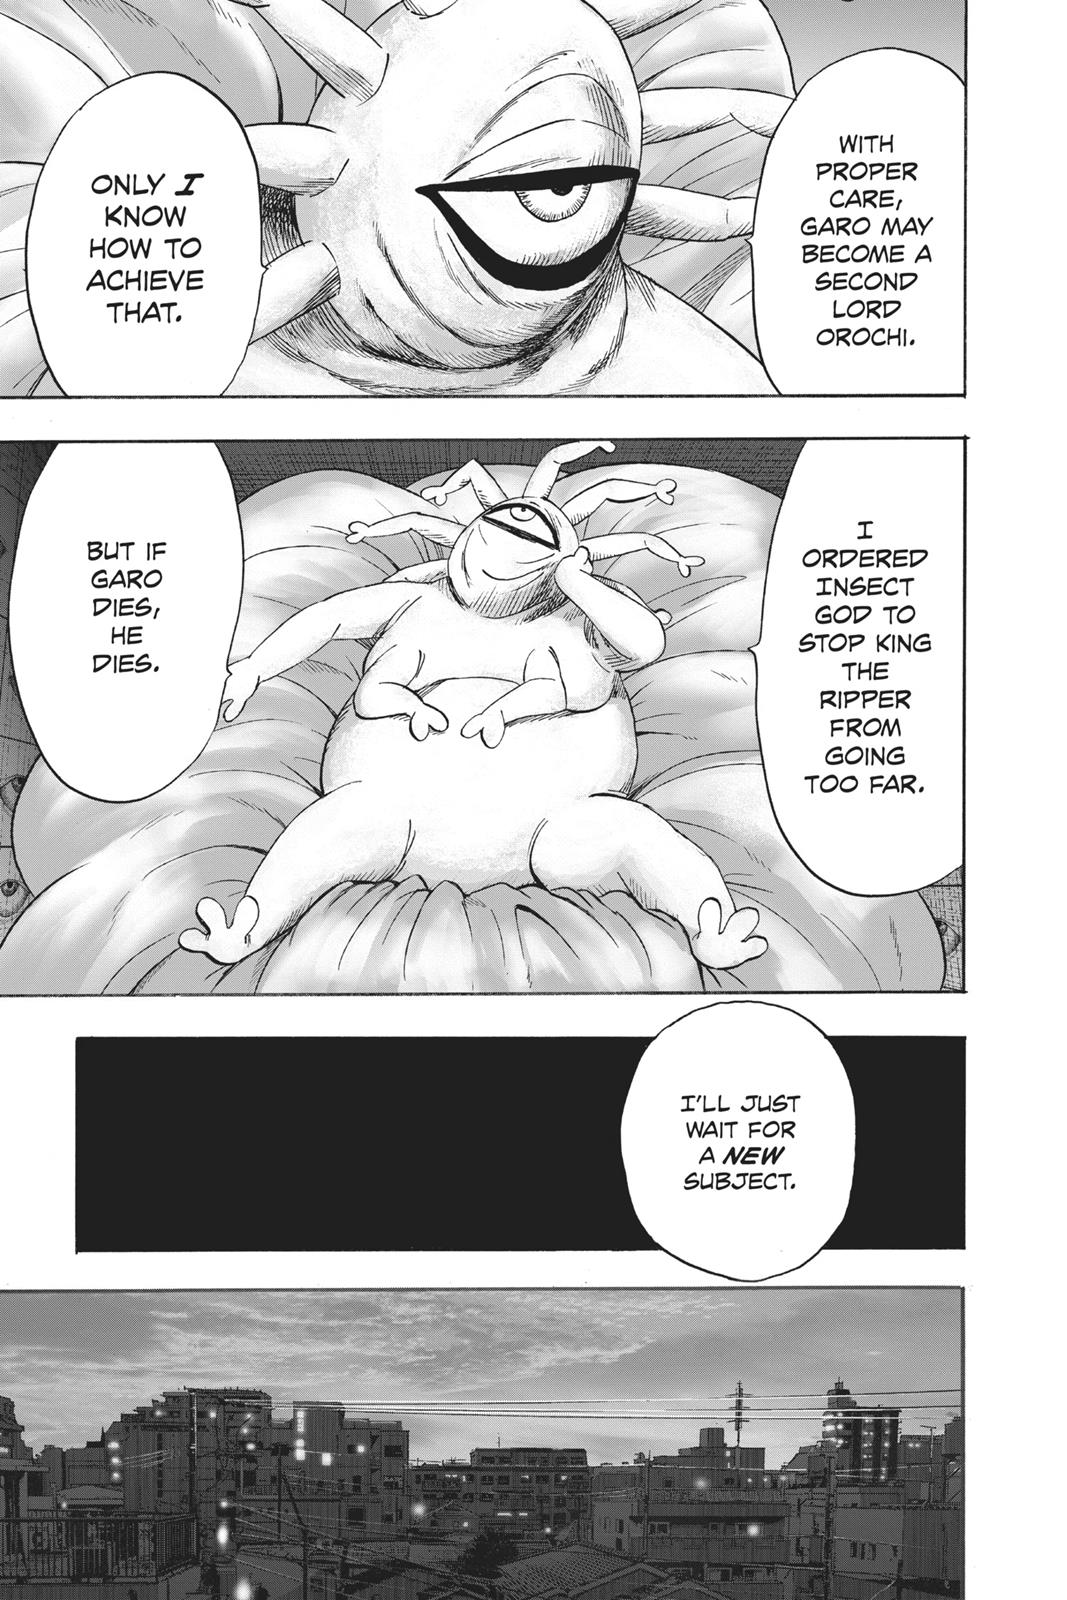 One-Punch Man, Punch 89 image 25